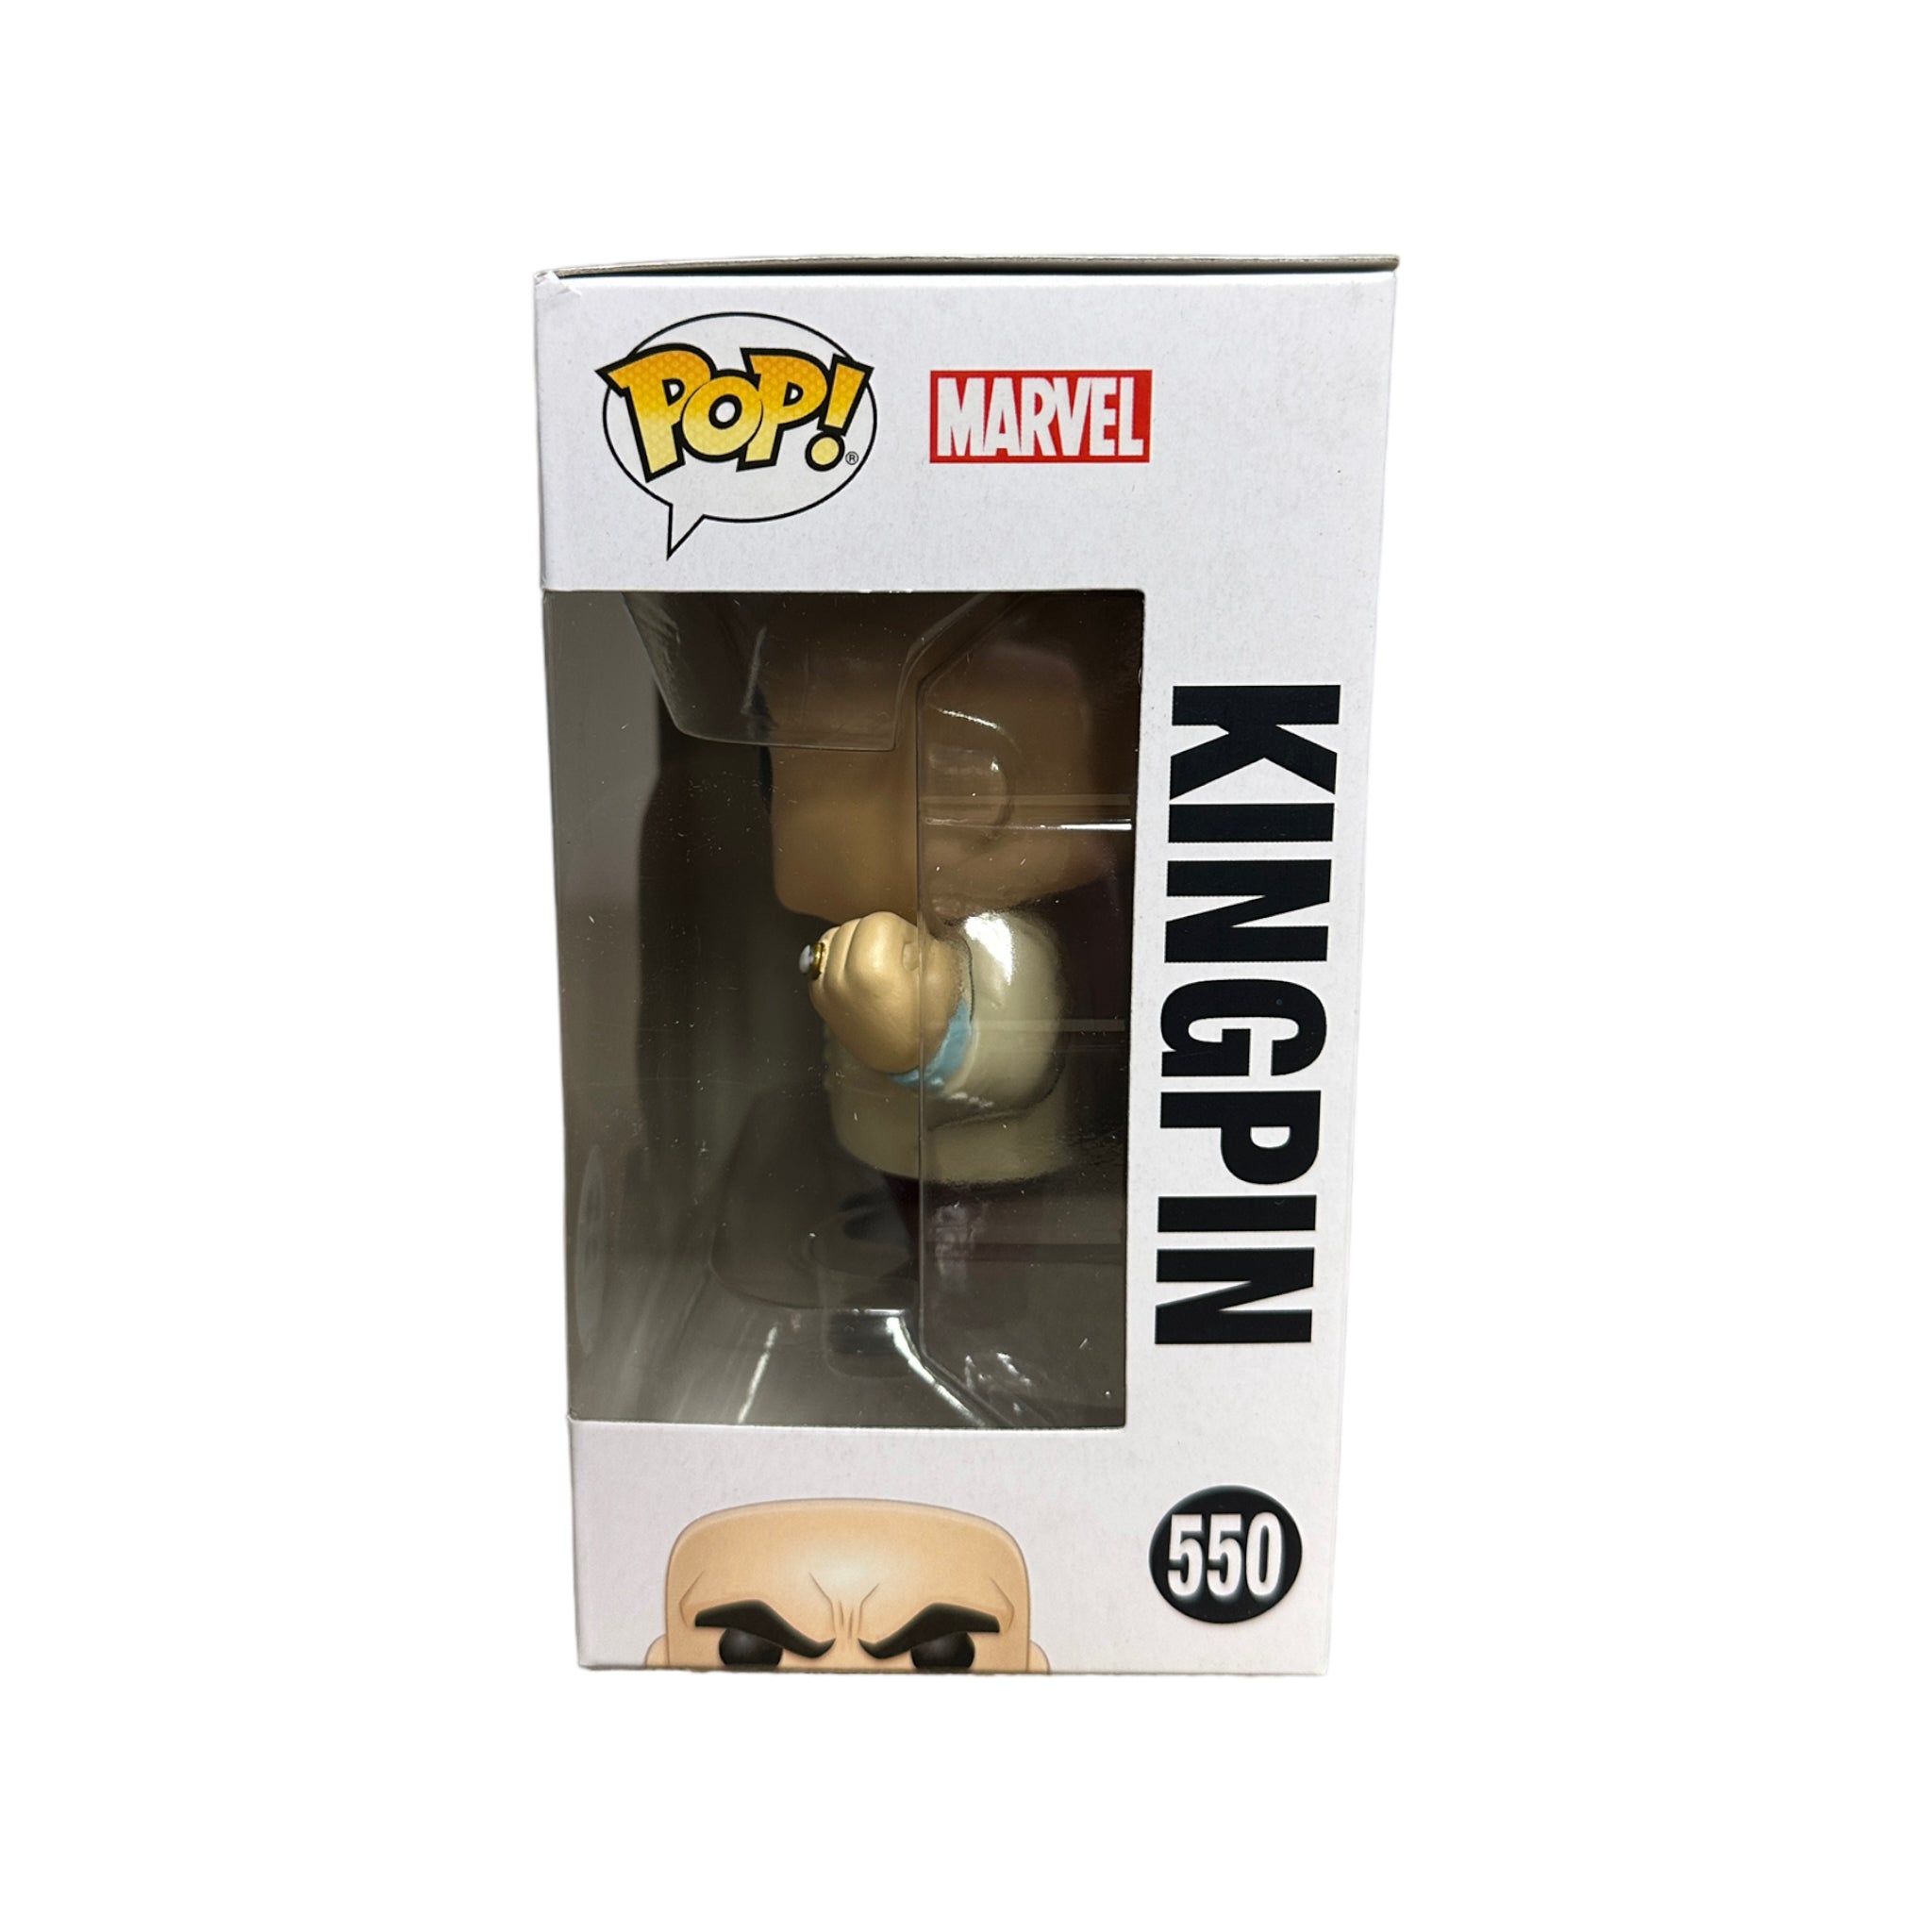 Kingpin #550 Funko Pop! - Marvel 80 Years - Speciality Series - Condition 8.75/10